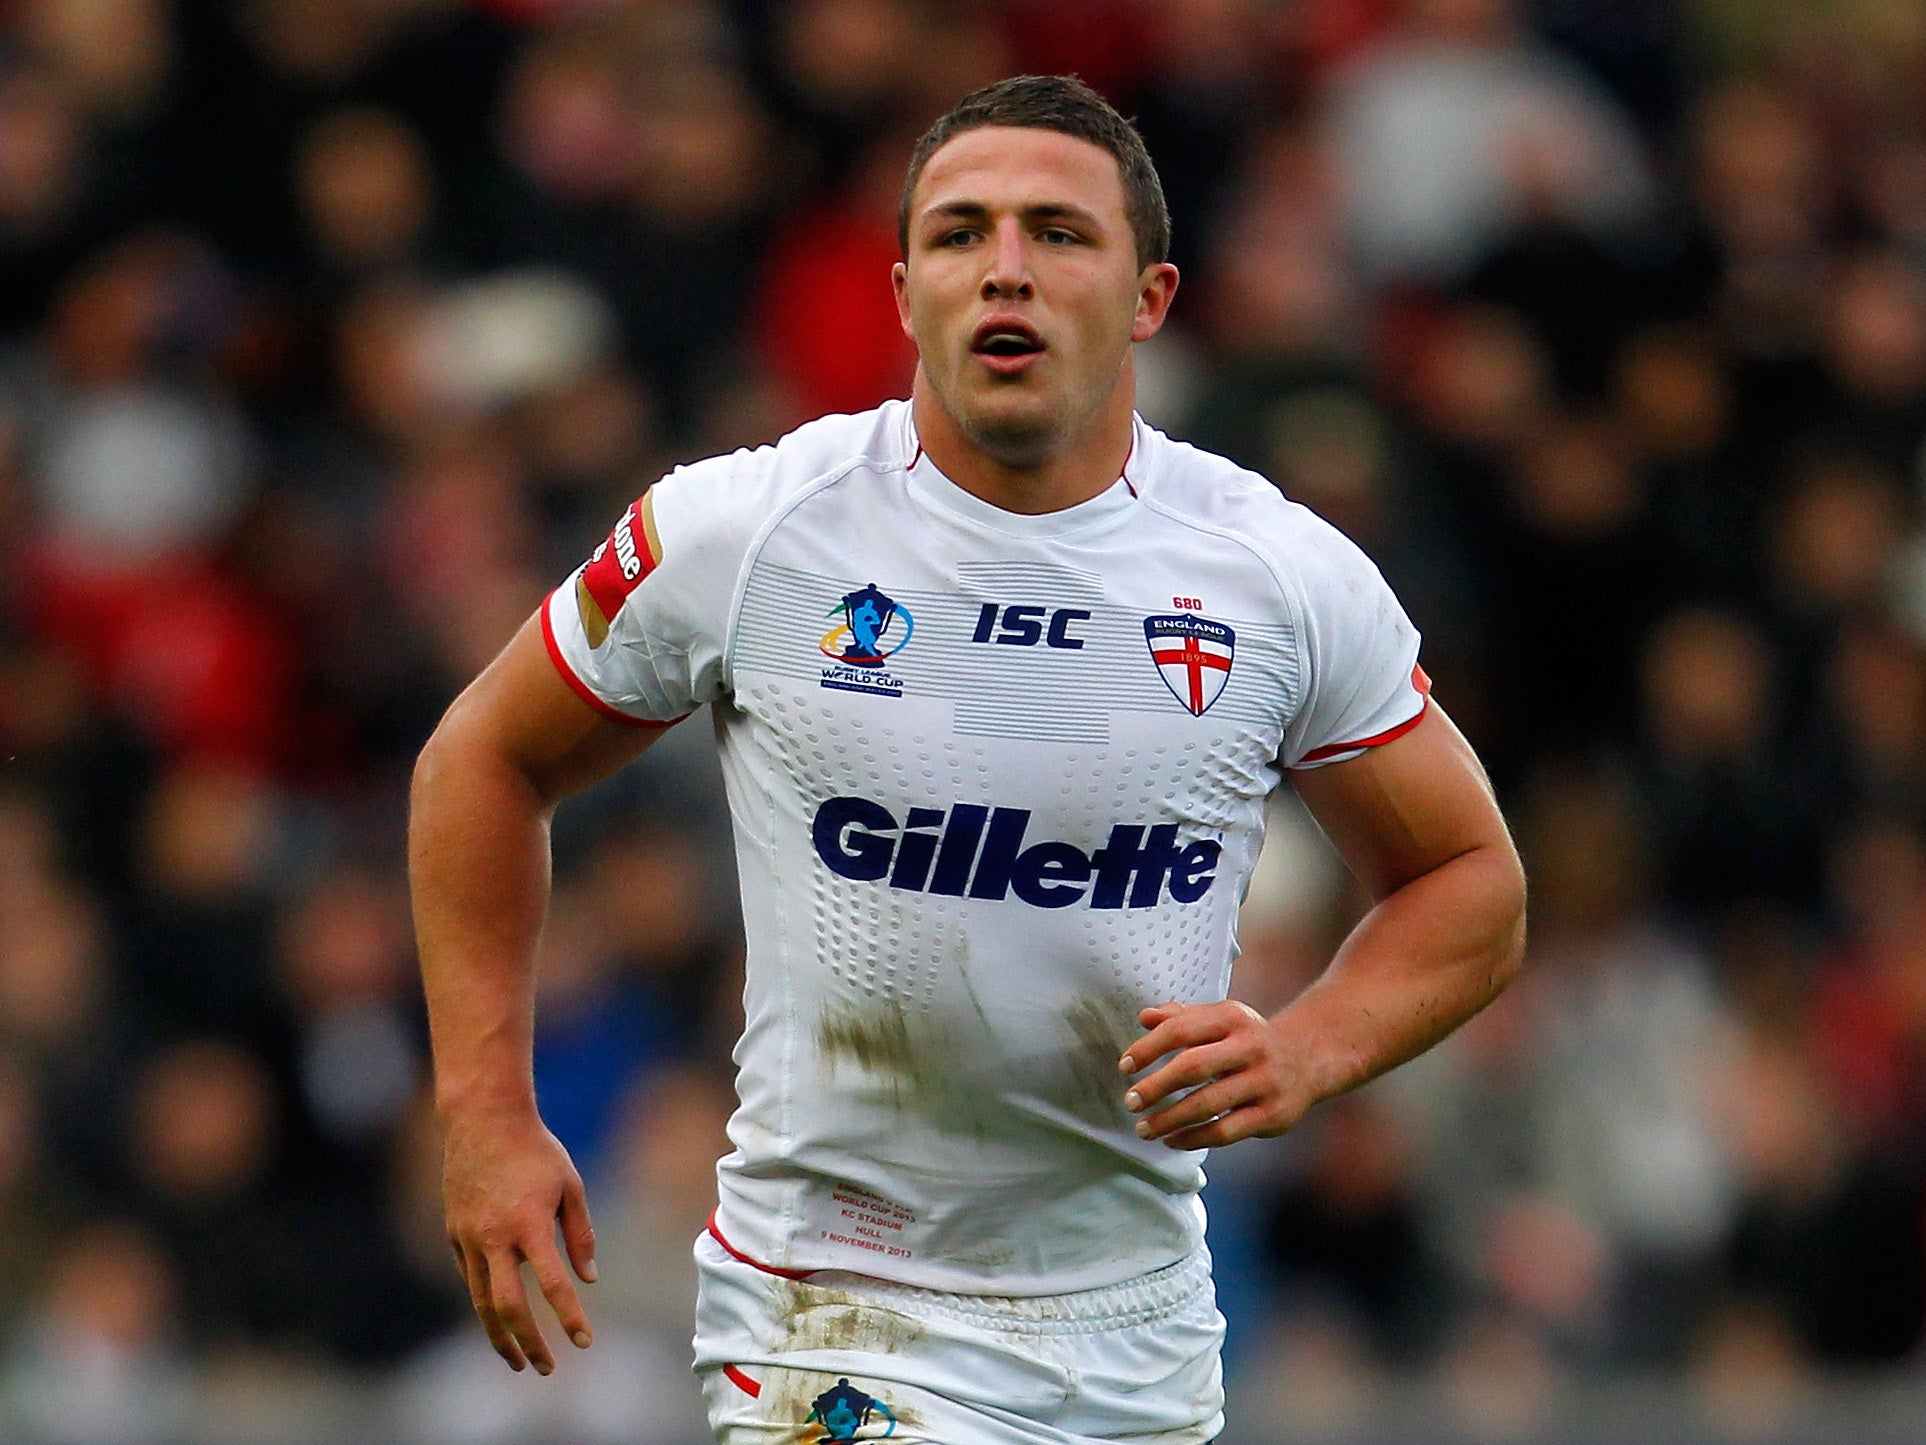 Sam Burgess is back in League after his Union sojourn last year